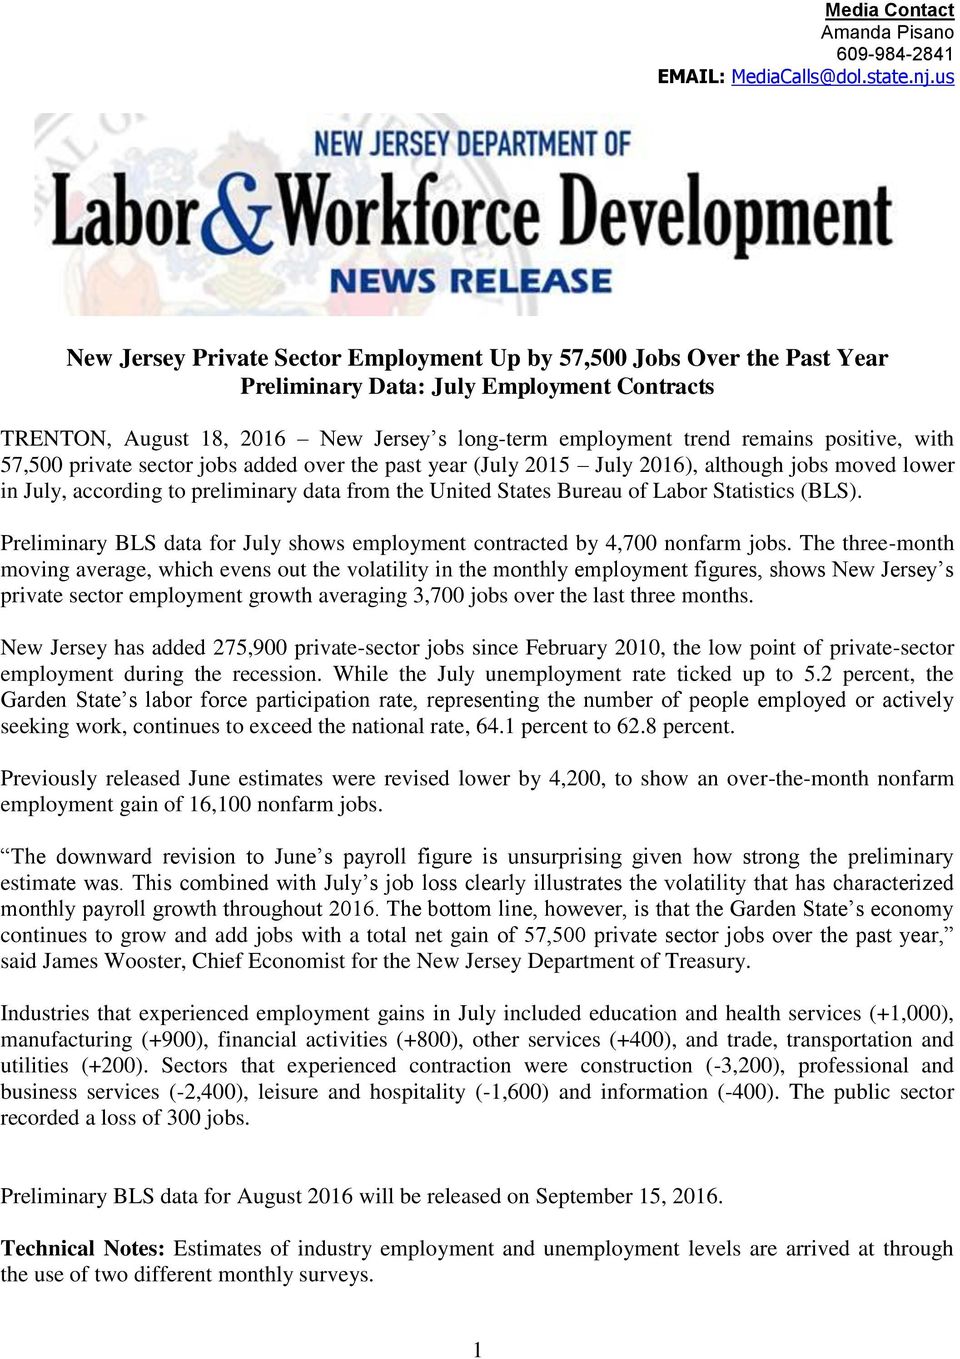 with 57,500 private sector jobs added over the past year (July July ), although jobs moved lower in July, according to preliminary data from the United States Bureau of Labor Statistics (BLS).